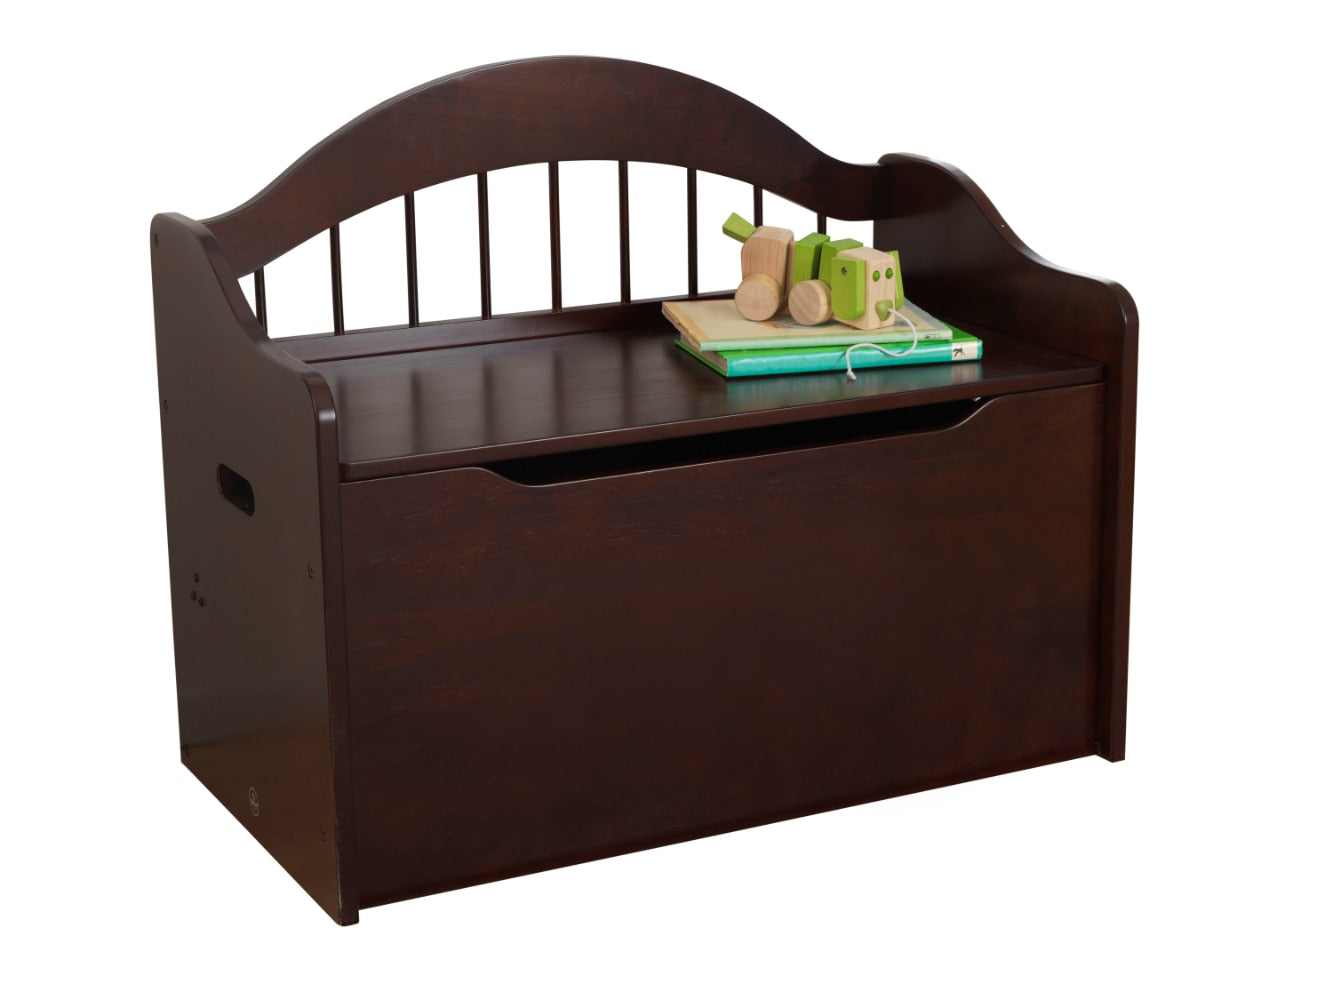 Limited Edition Wooden Toy Box and Bench with Handles, Espresso Home Organization and Storage Desk Organizers